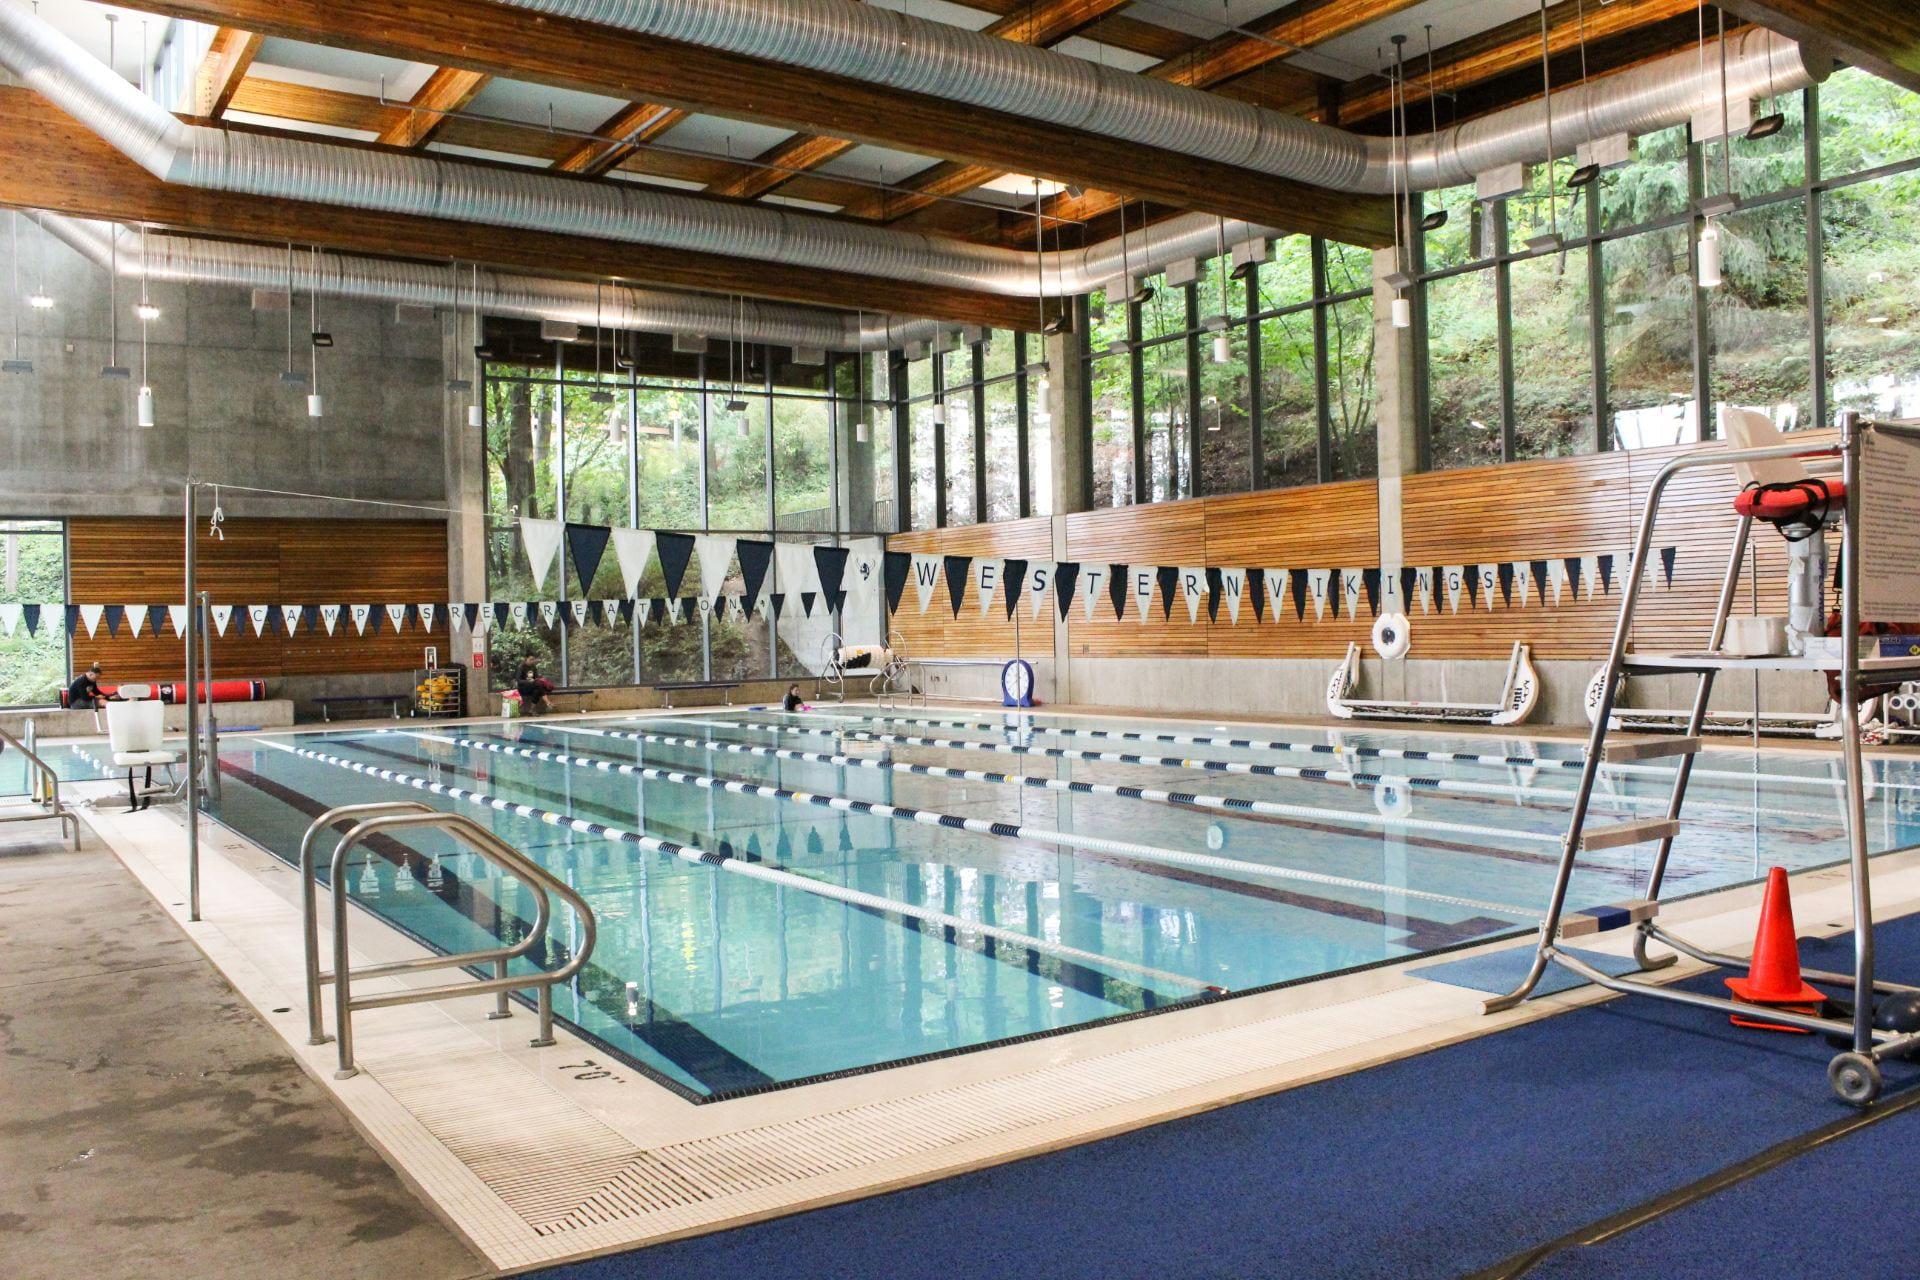 Western's large indoor swimming pool